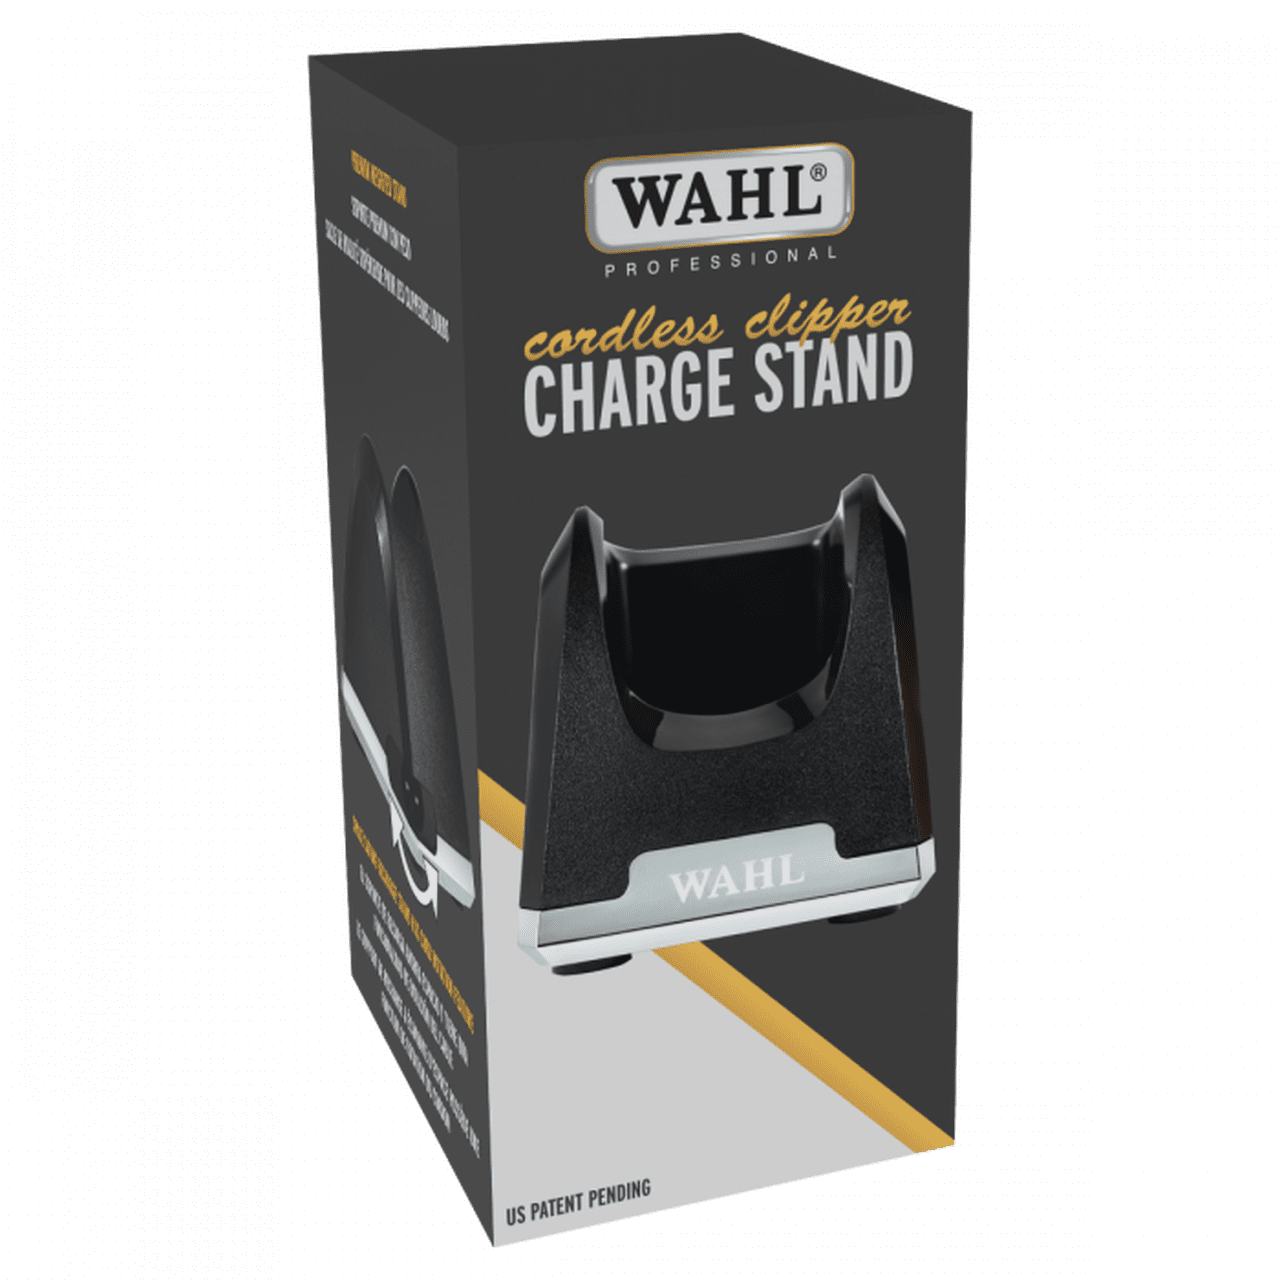 wahl Cordless Clipper Charge Stand #3801